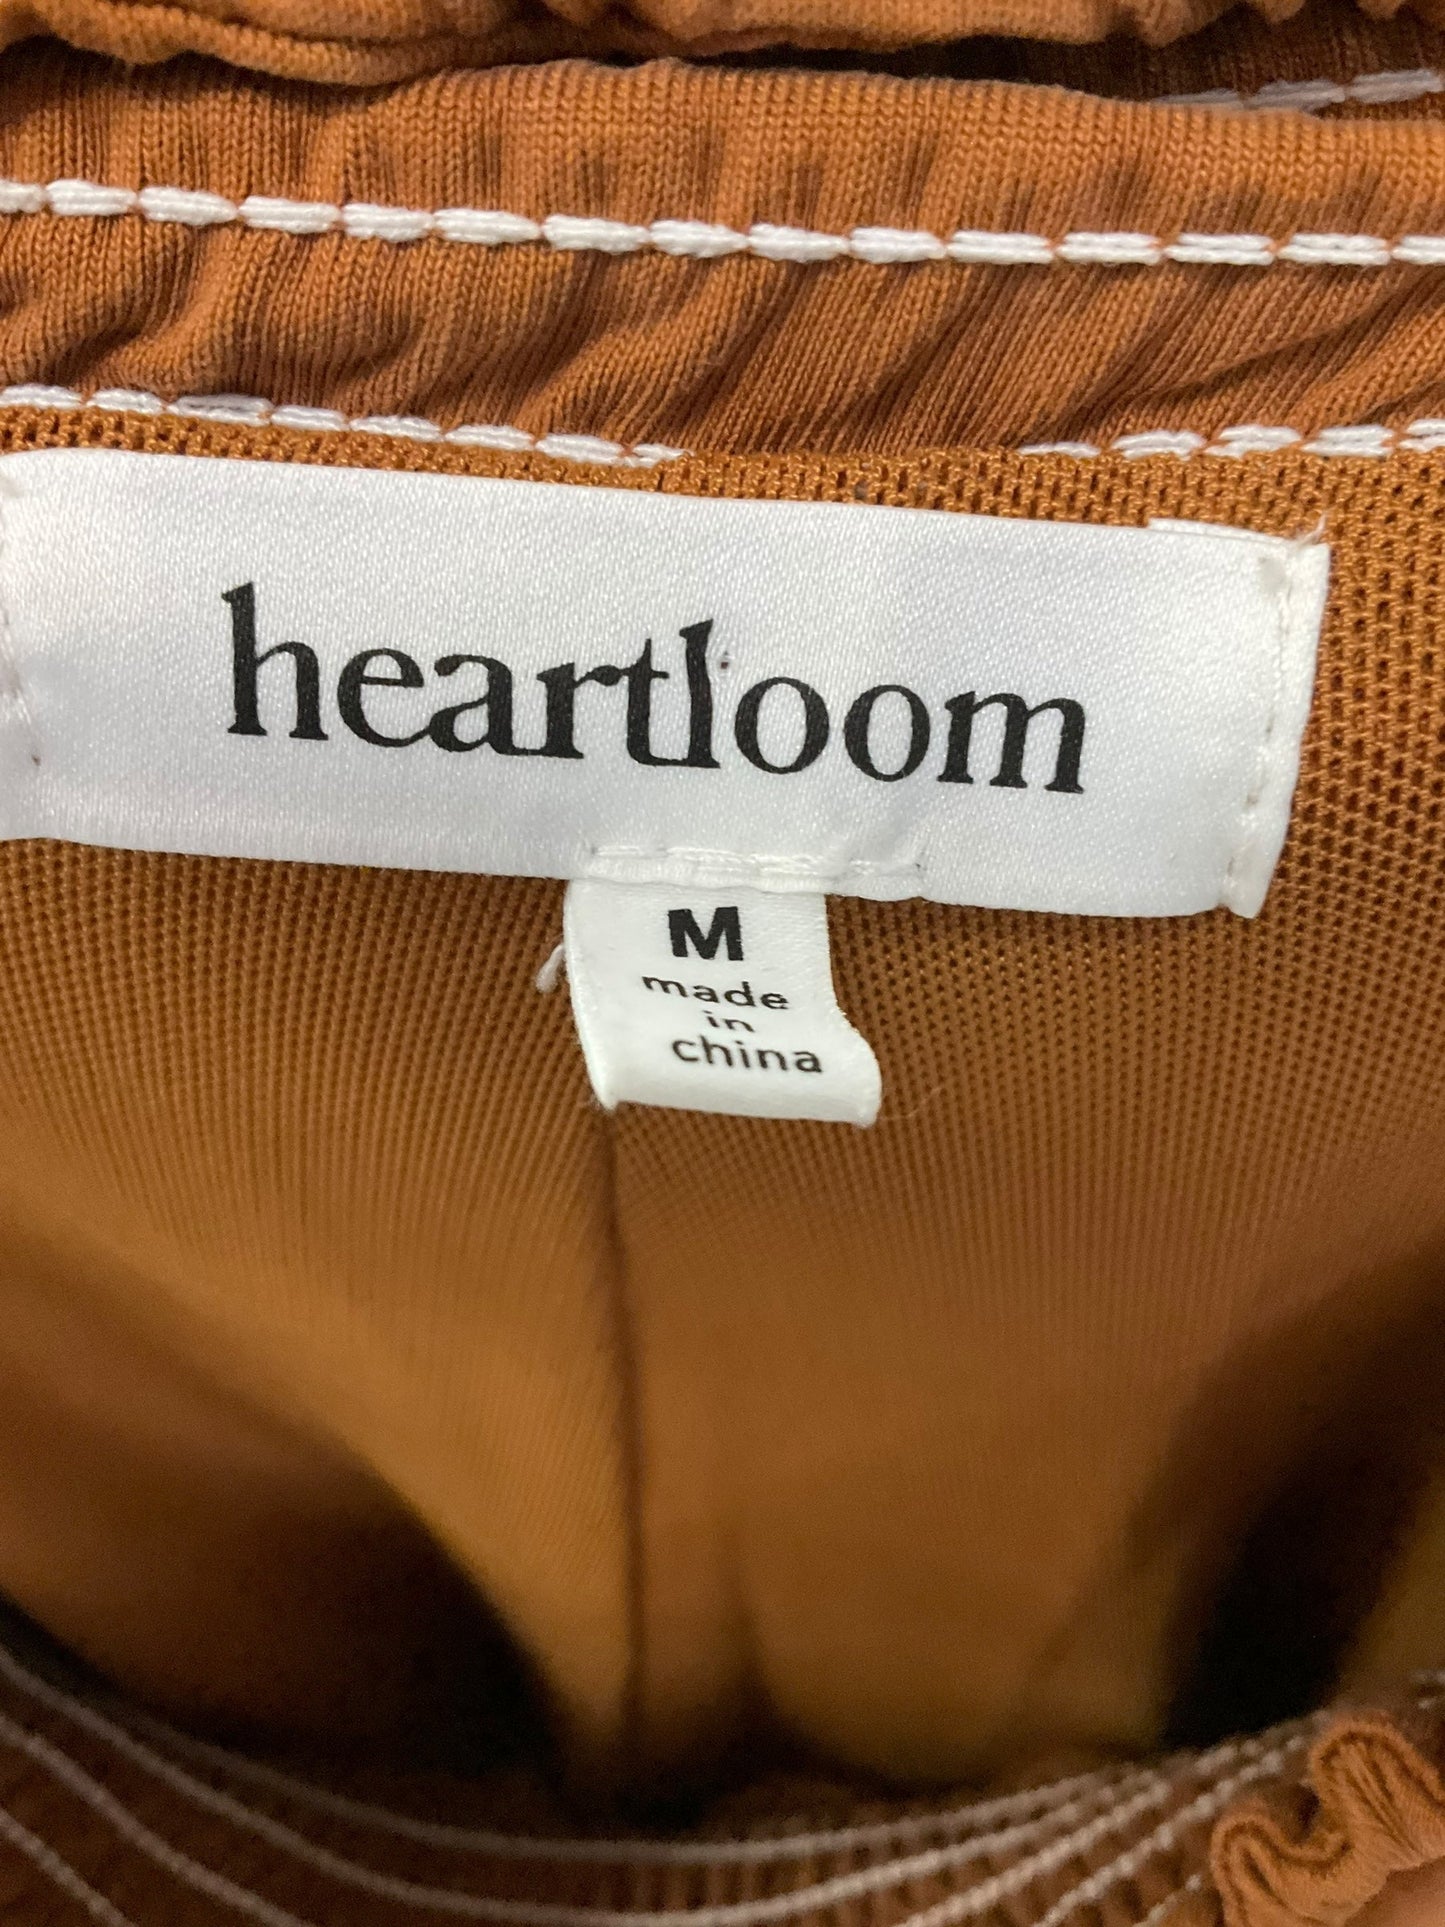 Brown Shorts Clothes Mentor, Size M